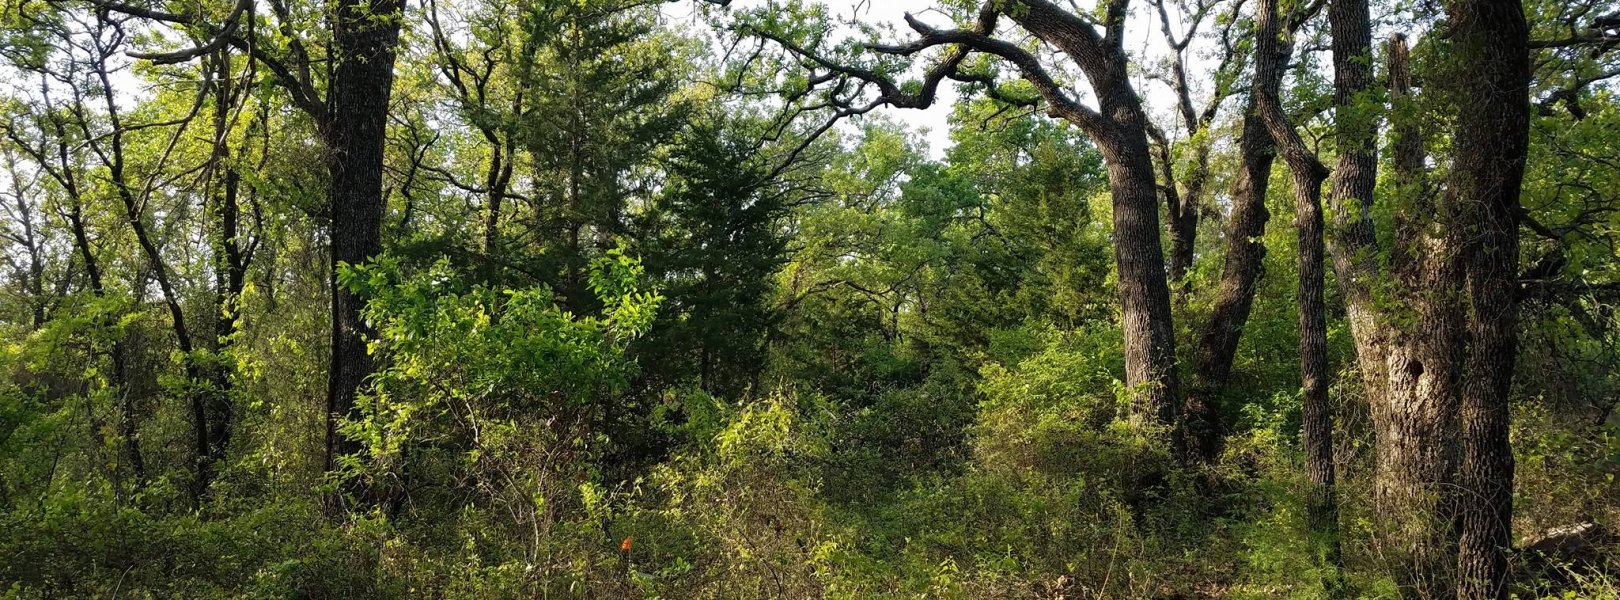 Forest at the LBJ National Grassland (CLBJ) field site in Texas. 